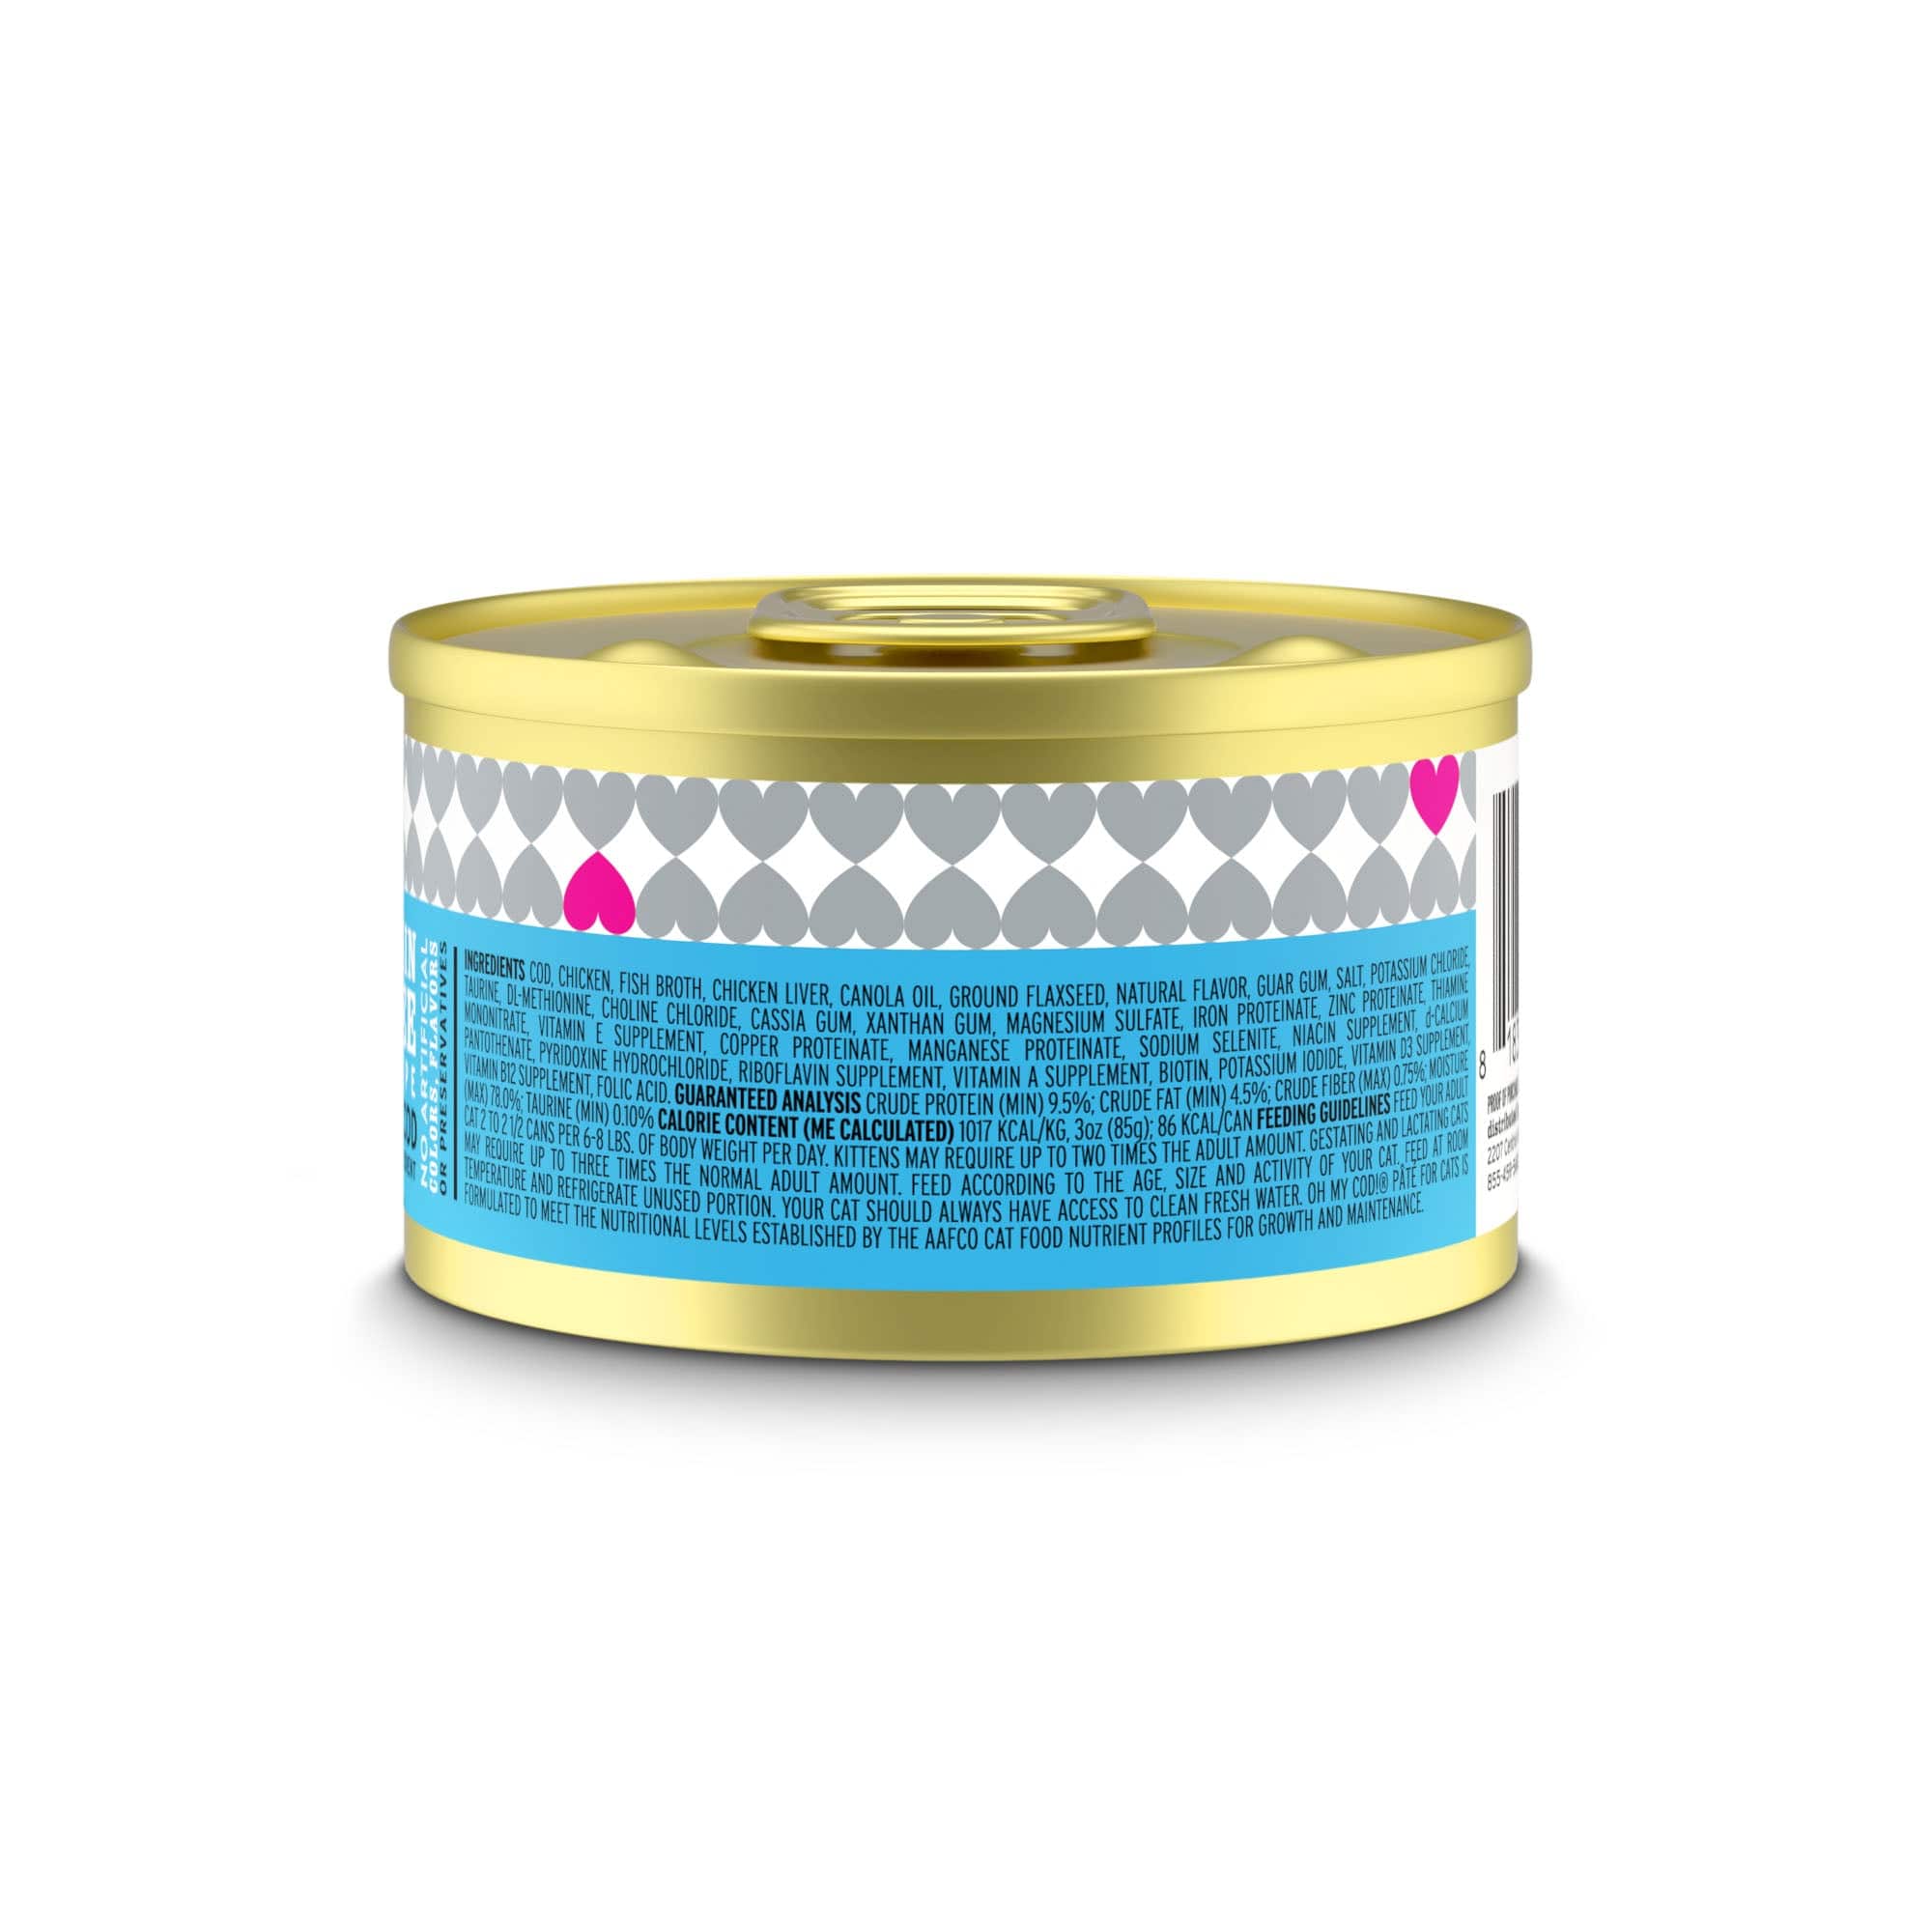 A close-up of a can of Oh My Cod! pâté cat food, showcasing a gold lid and label. Rich and savory cod pâté for your cat's delight.